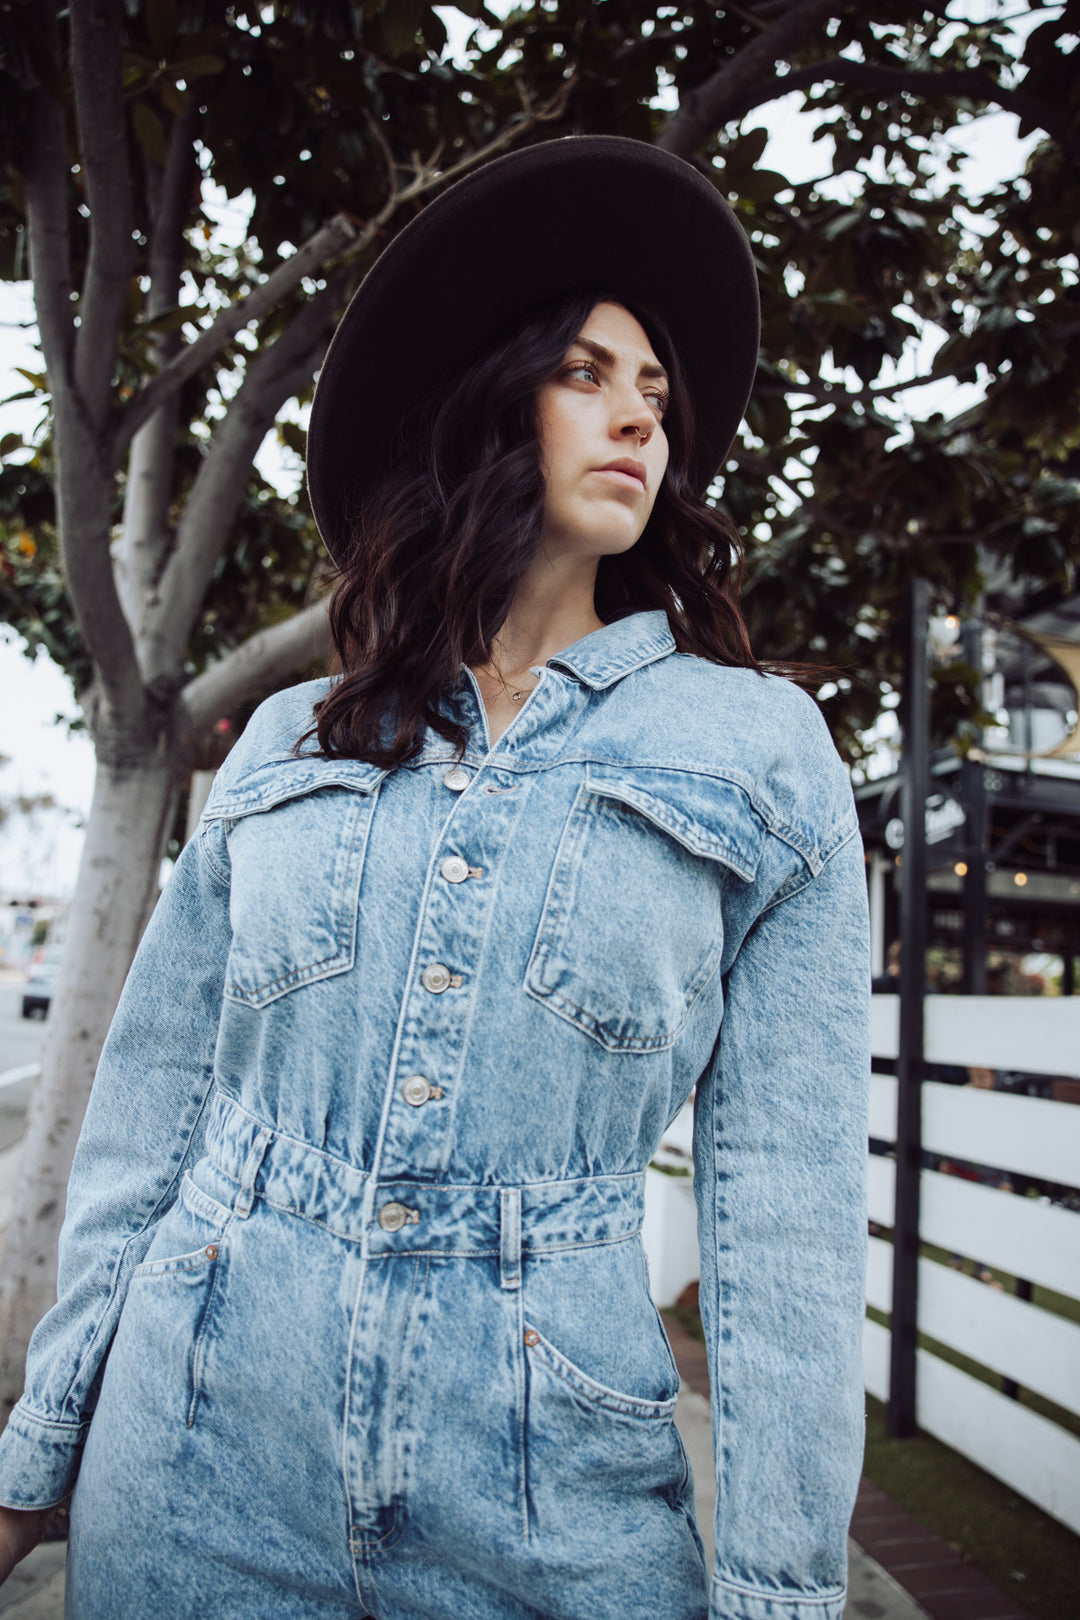 FREE PEOPLE TOUCH THE SKY DENIM JUMPSUIT